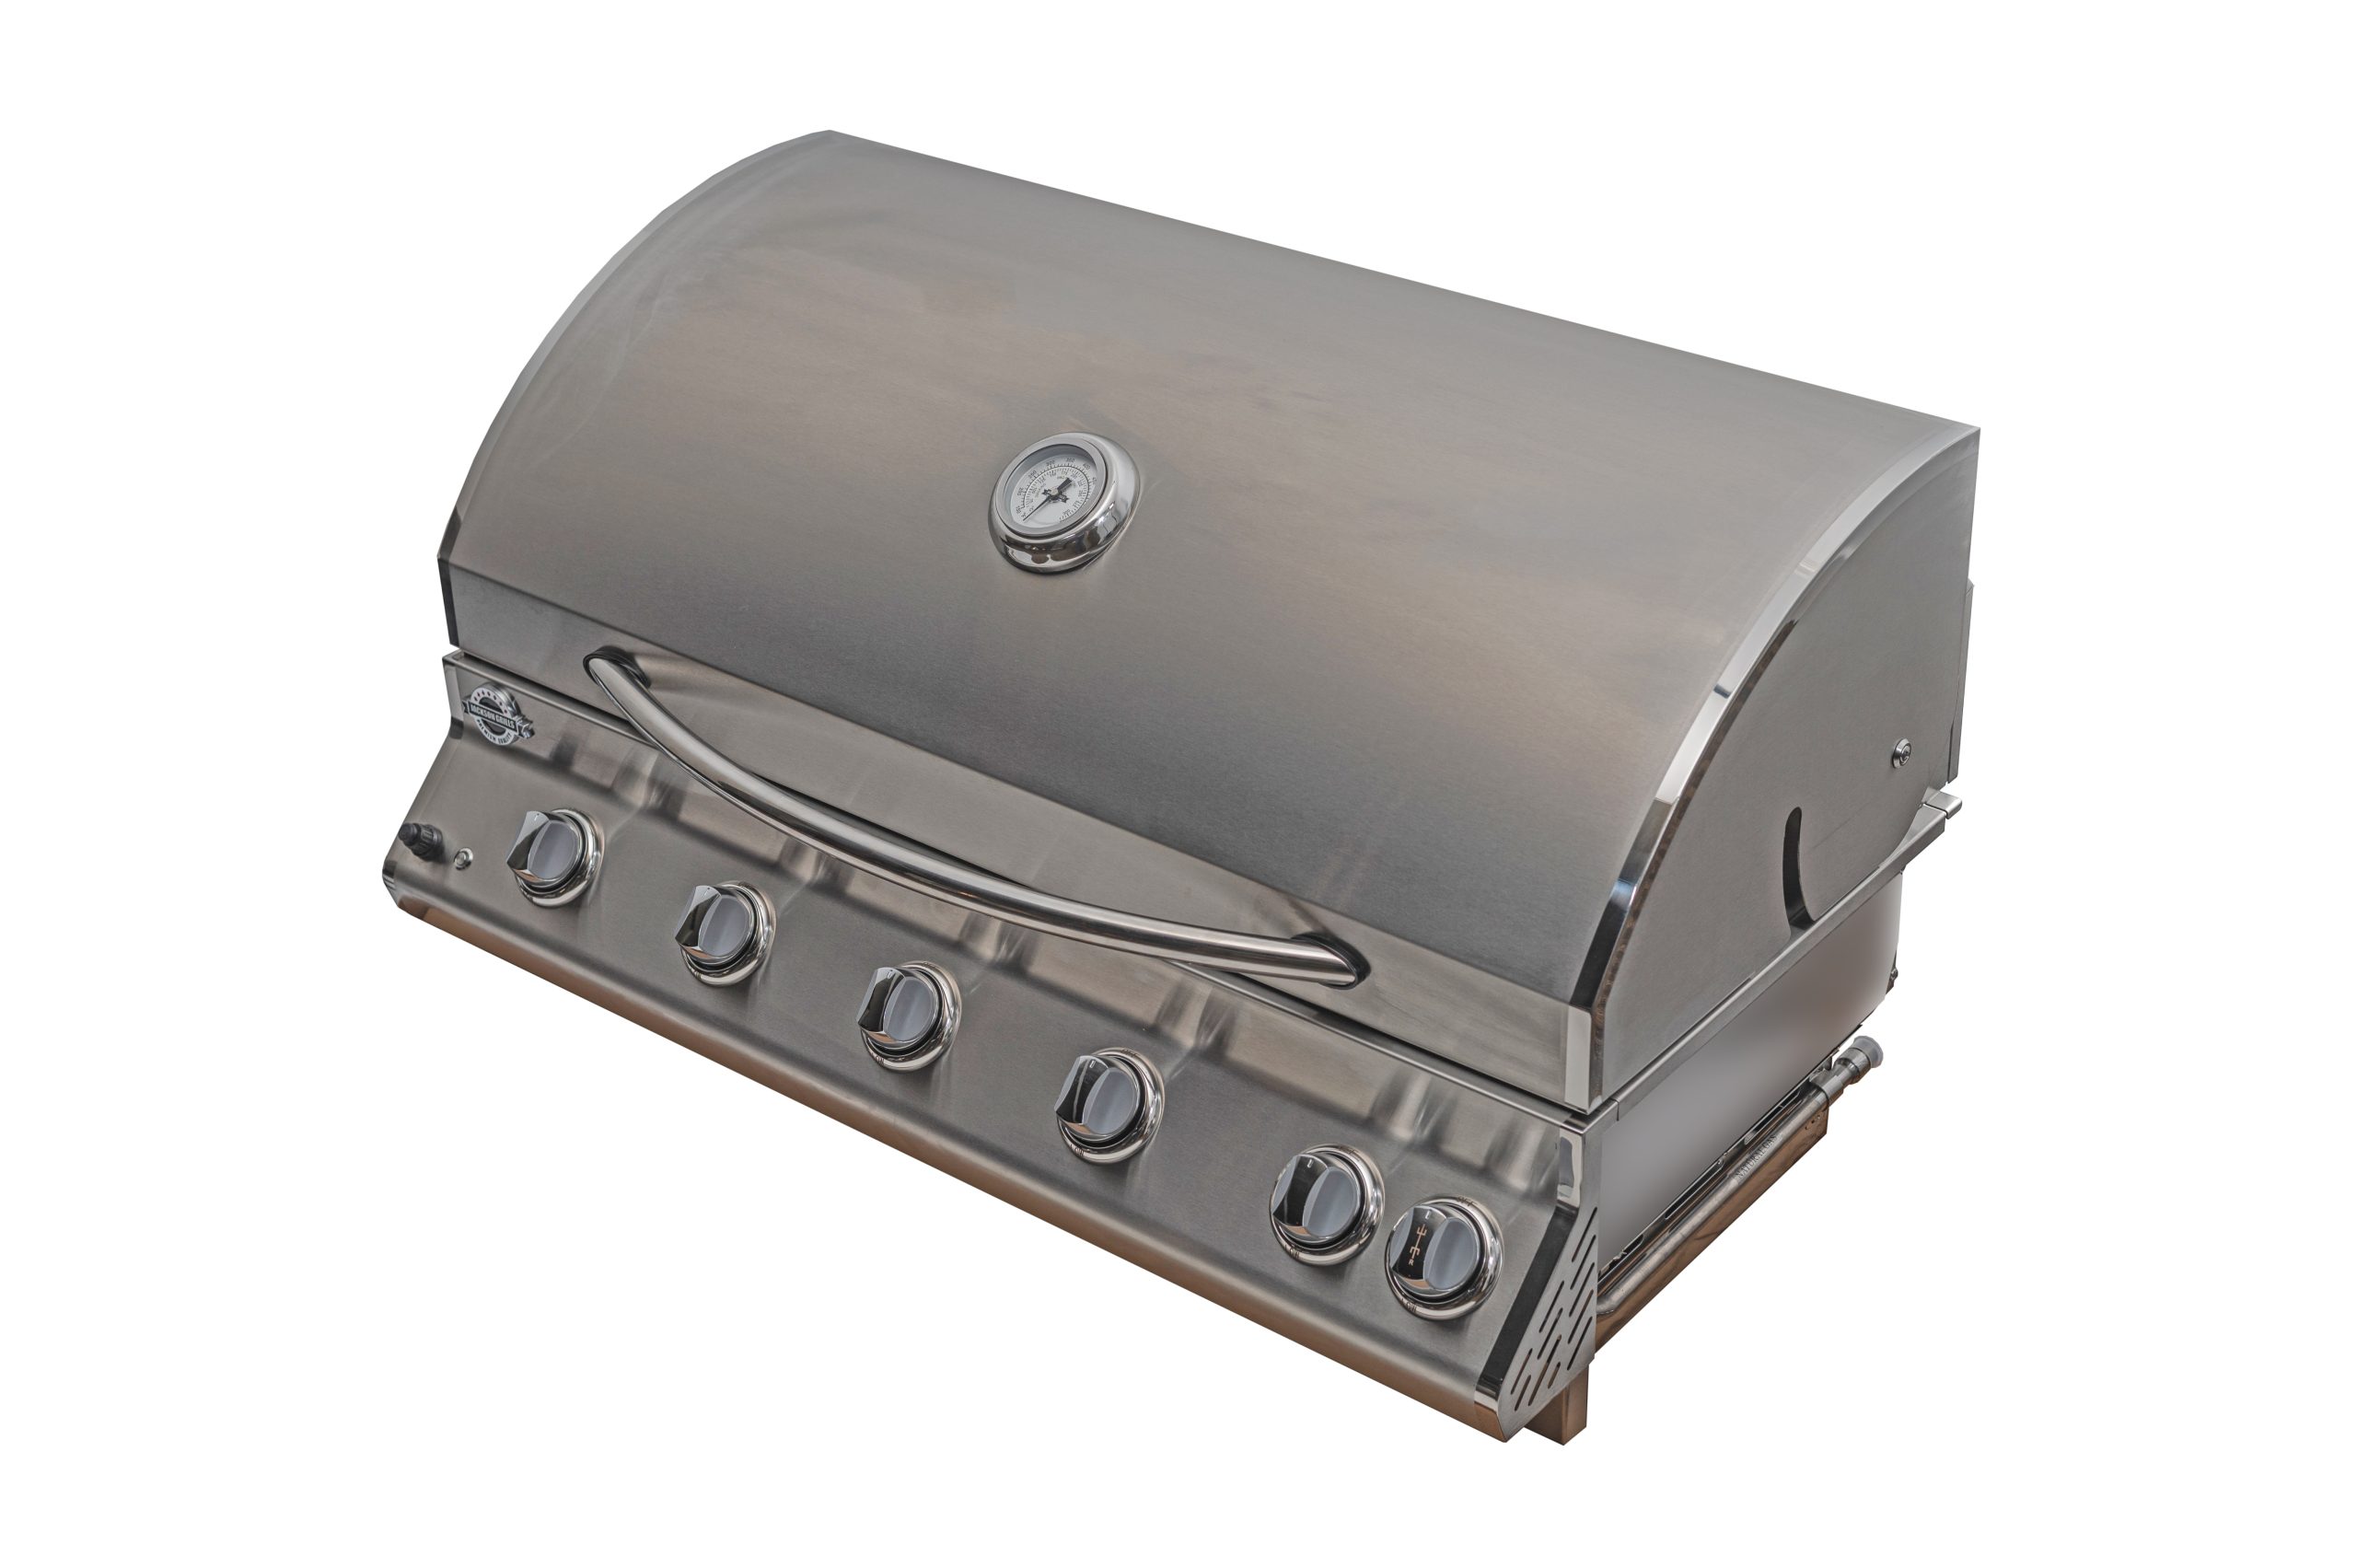 Jackson Grills - SUPREME 850 STAINLESS STEEL GAS GRILL